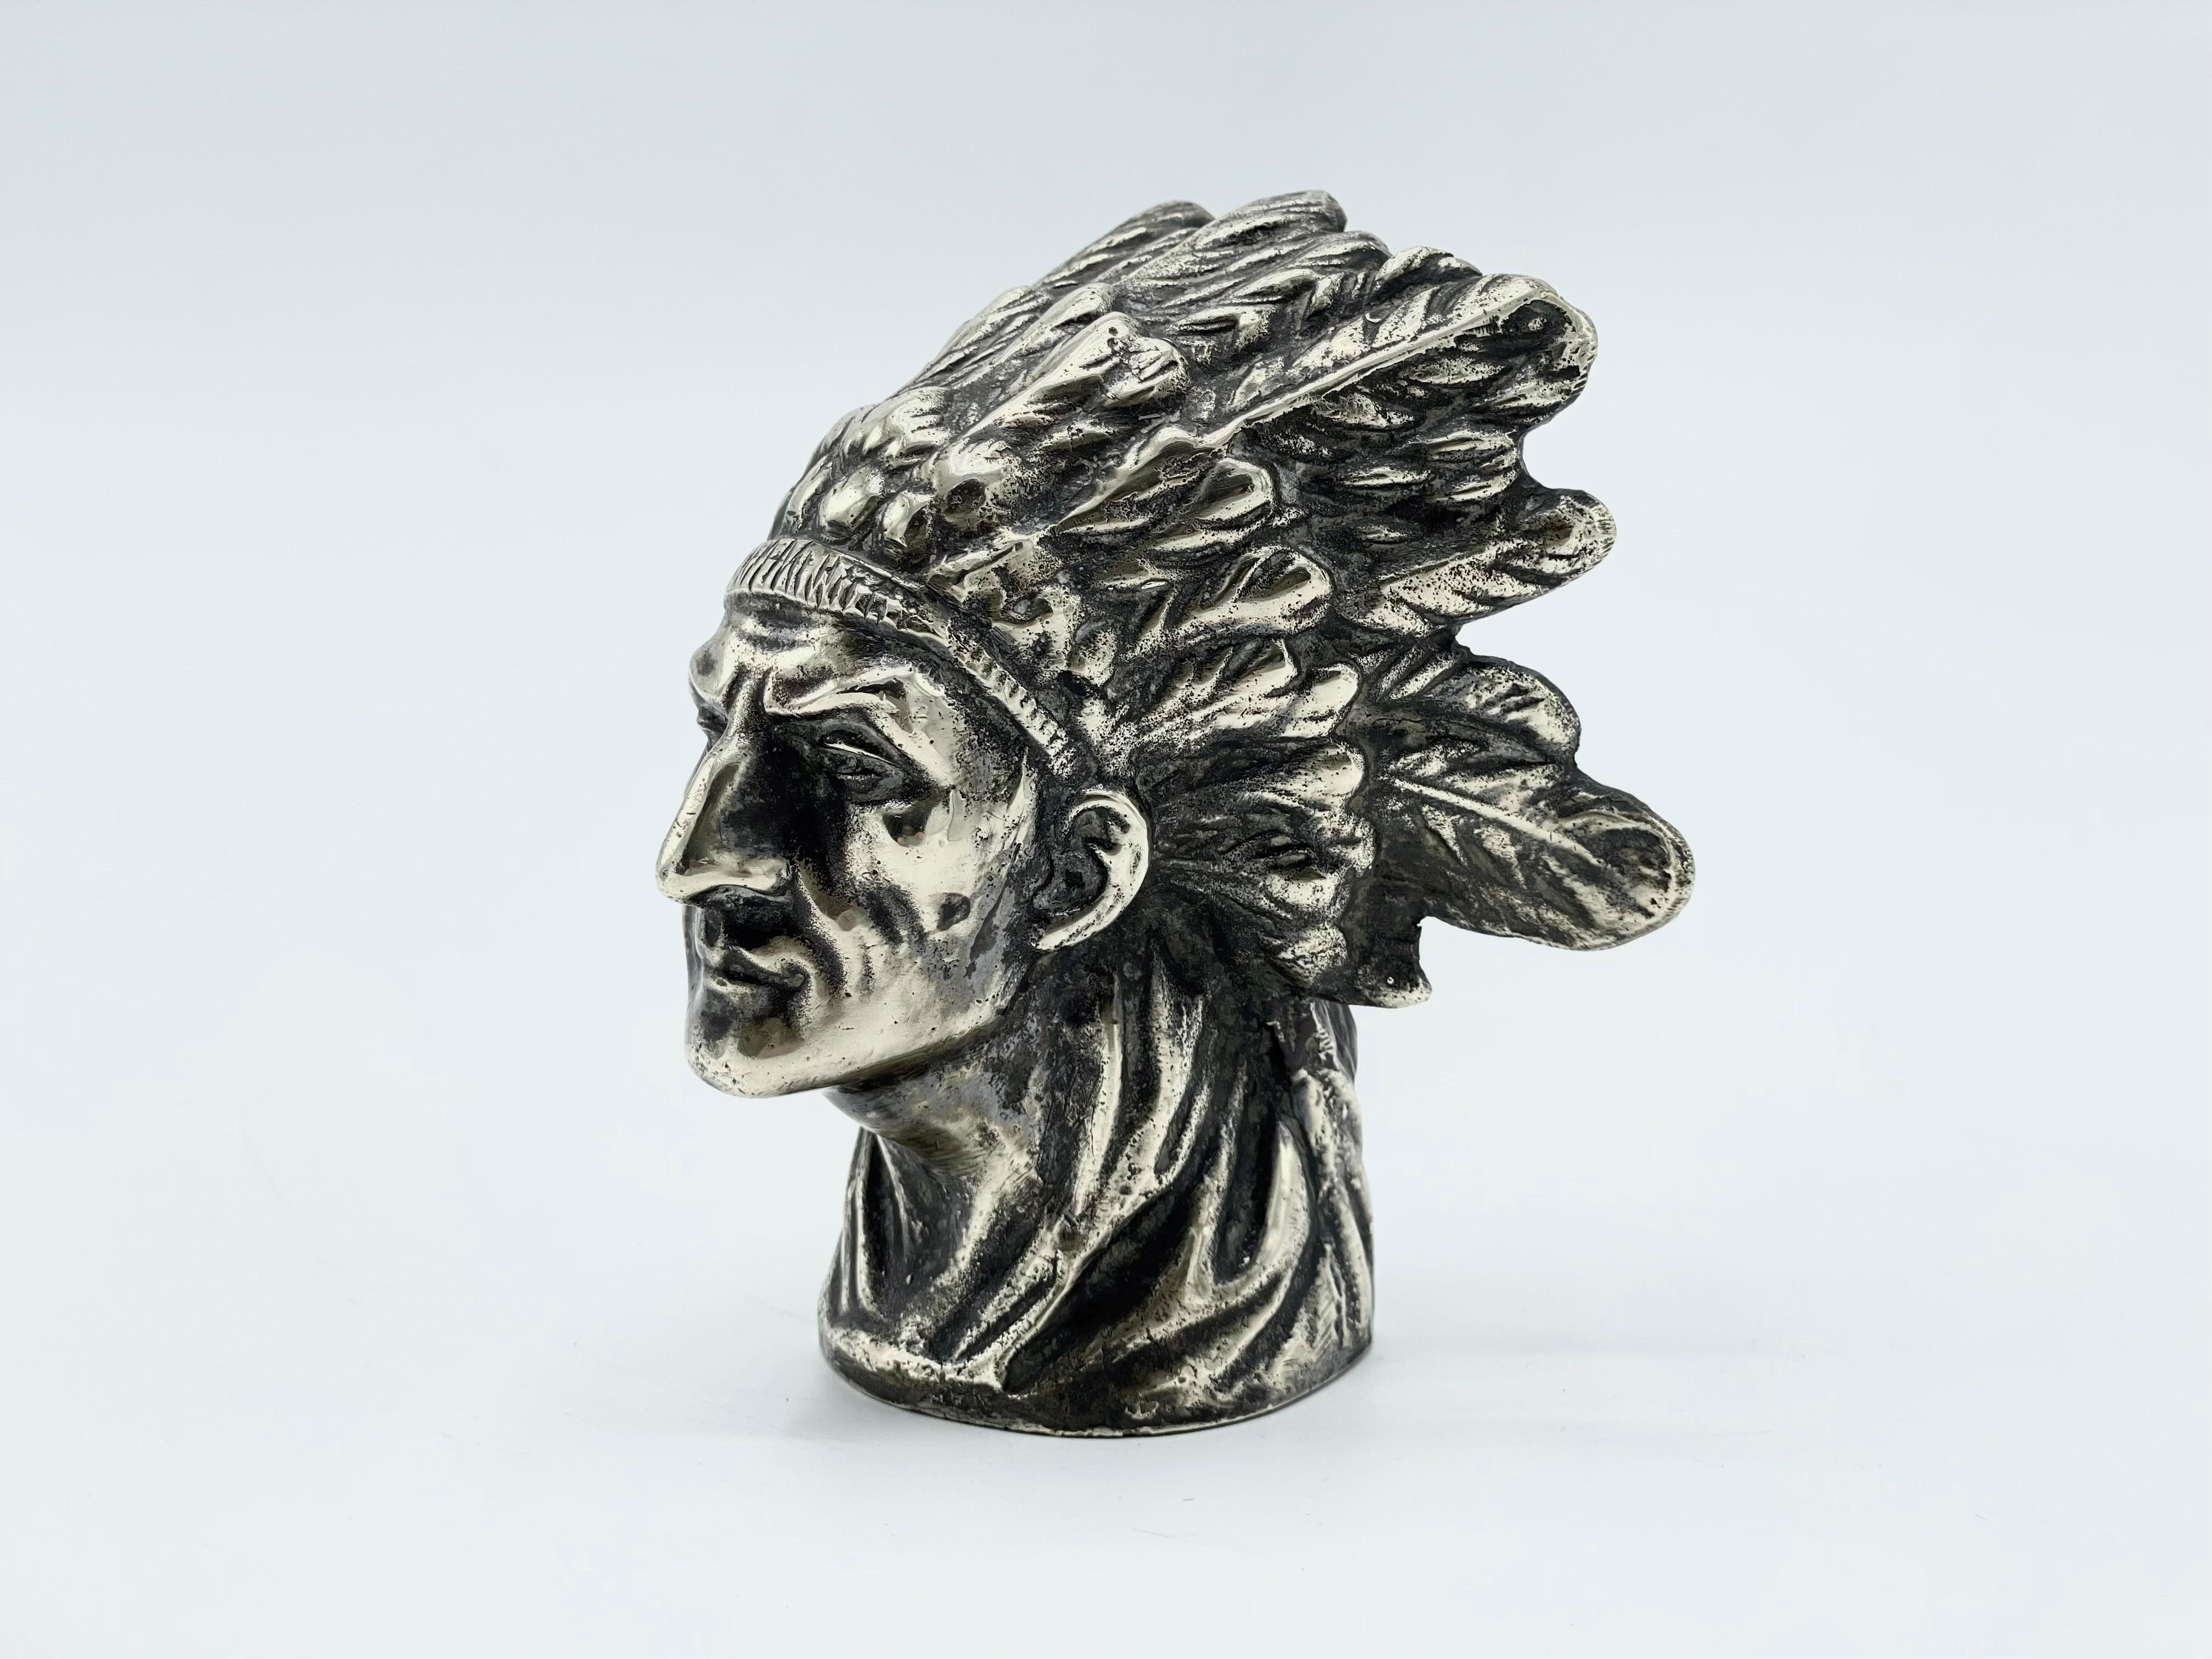 French Art Deco Indian Car mascot by Ruffoni, 1930
Automotive radiator cap mascot representing an Indian chief.
Artist / Maker: Ruffony
Signature / Marks: Ruffony
Style: Art Deco
Material: Bronze with Silver patina
Date: 1930
Origin: